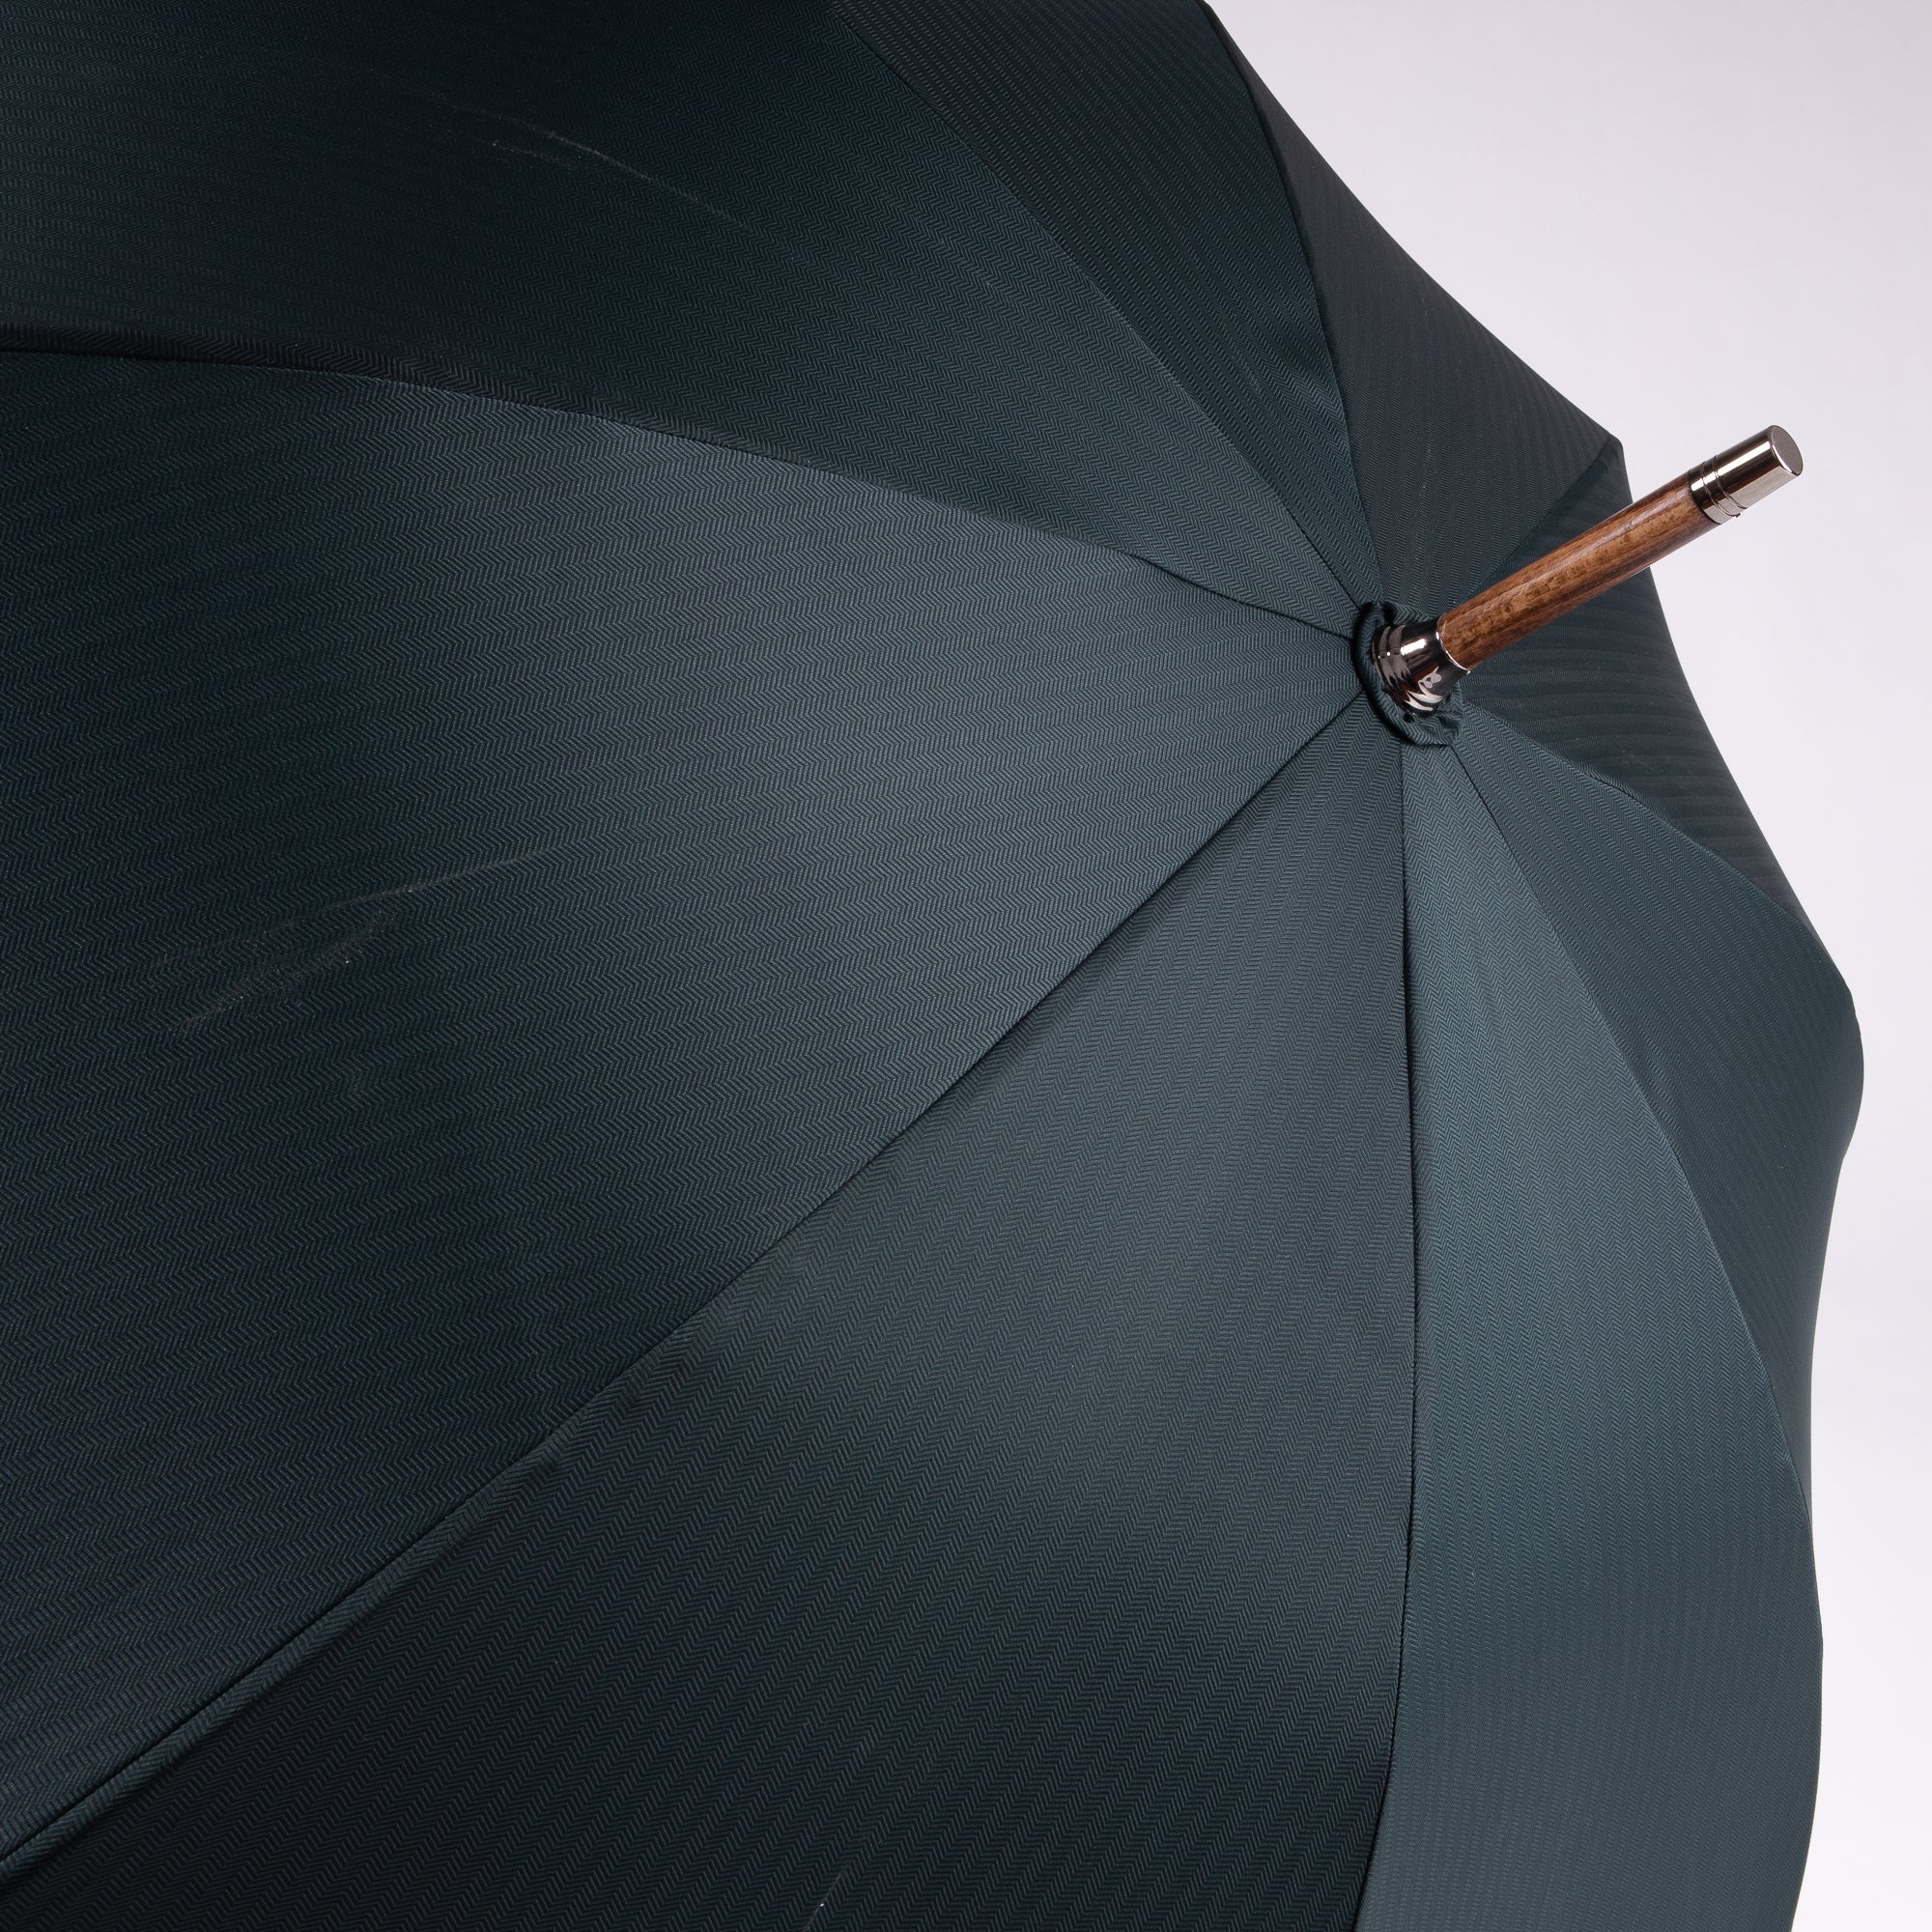 Umbrella with Brided Leather Handle